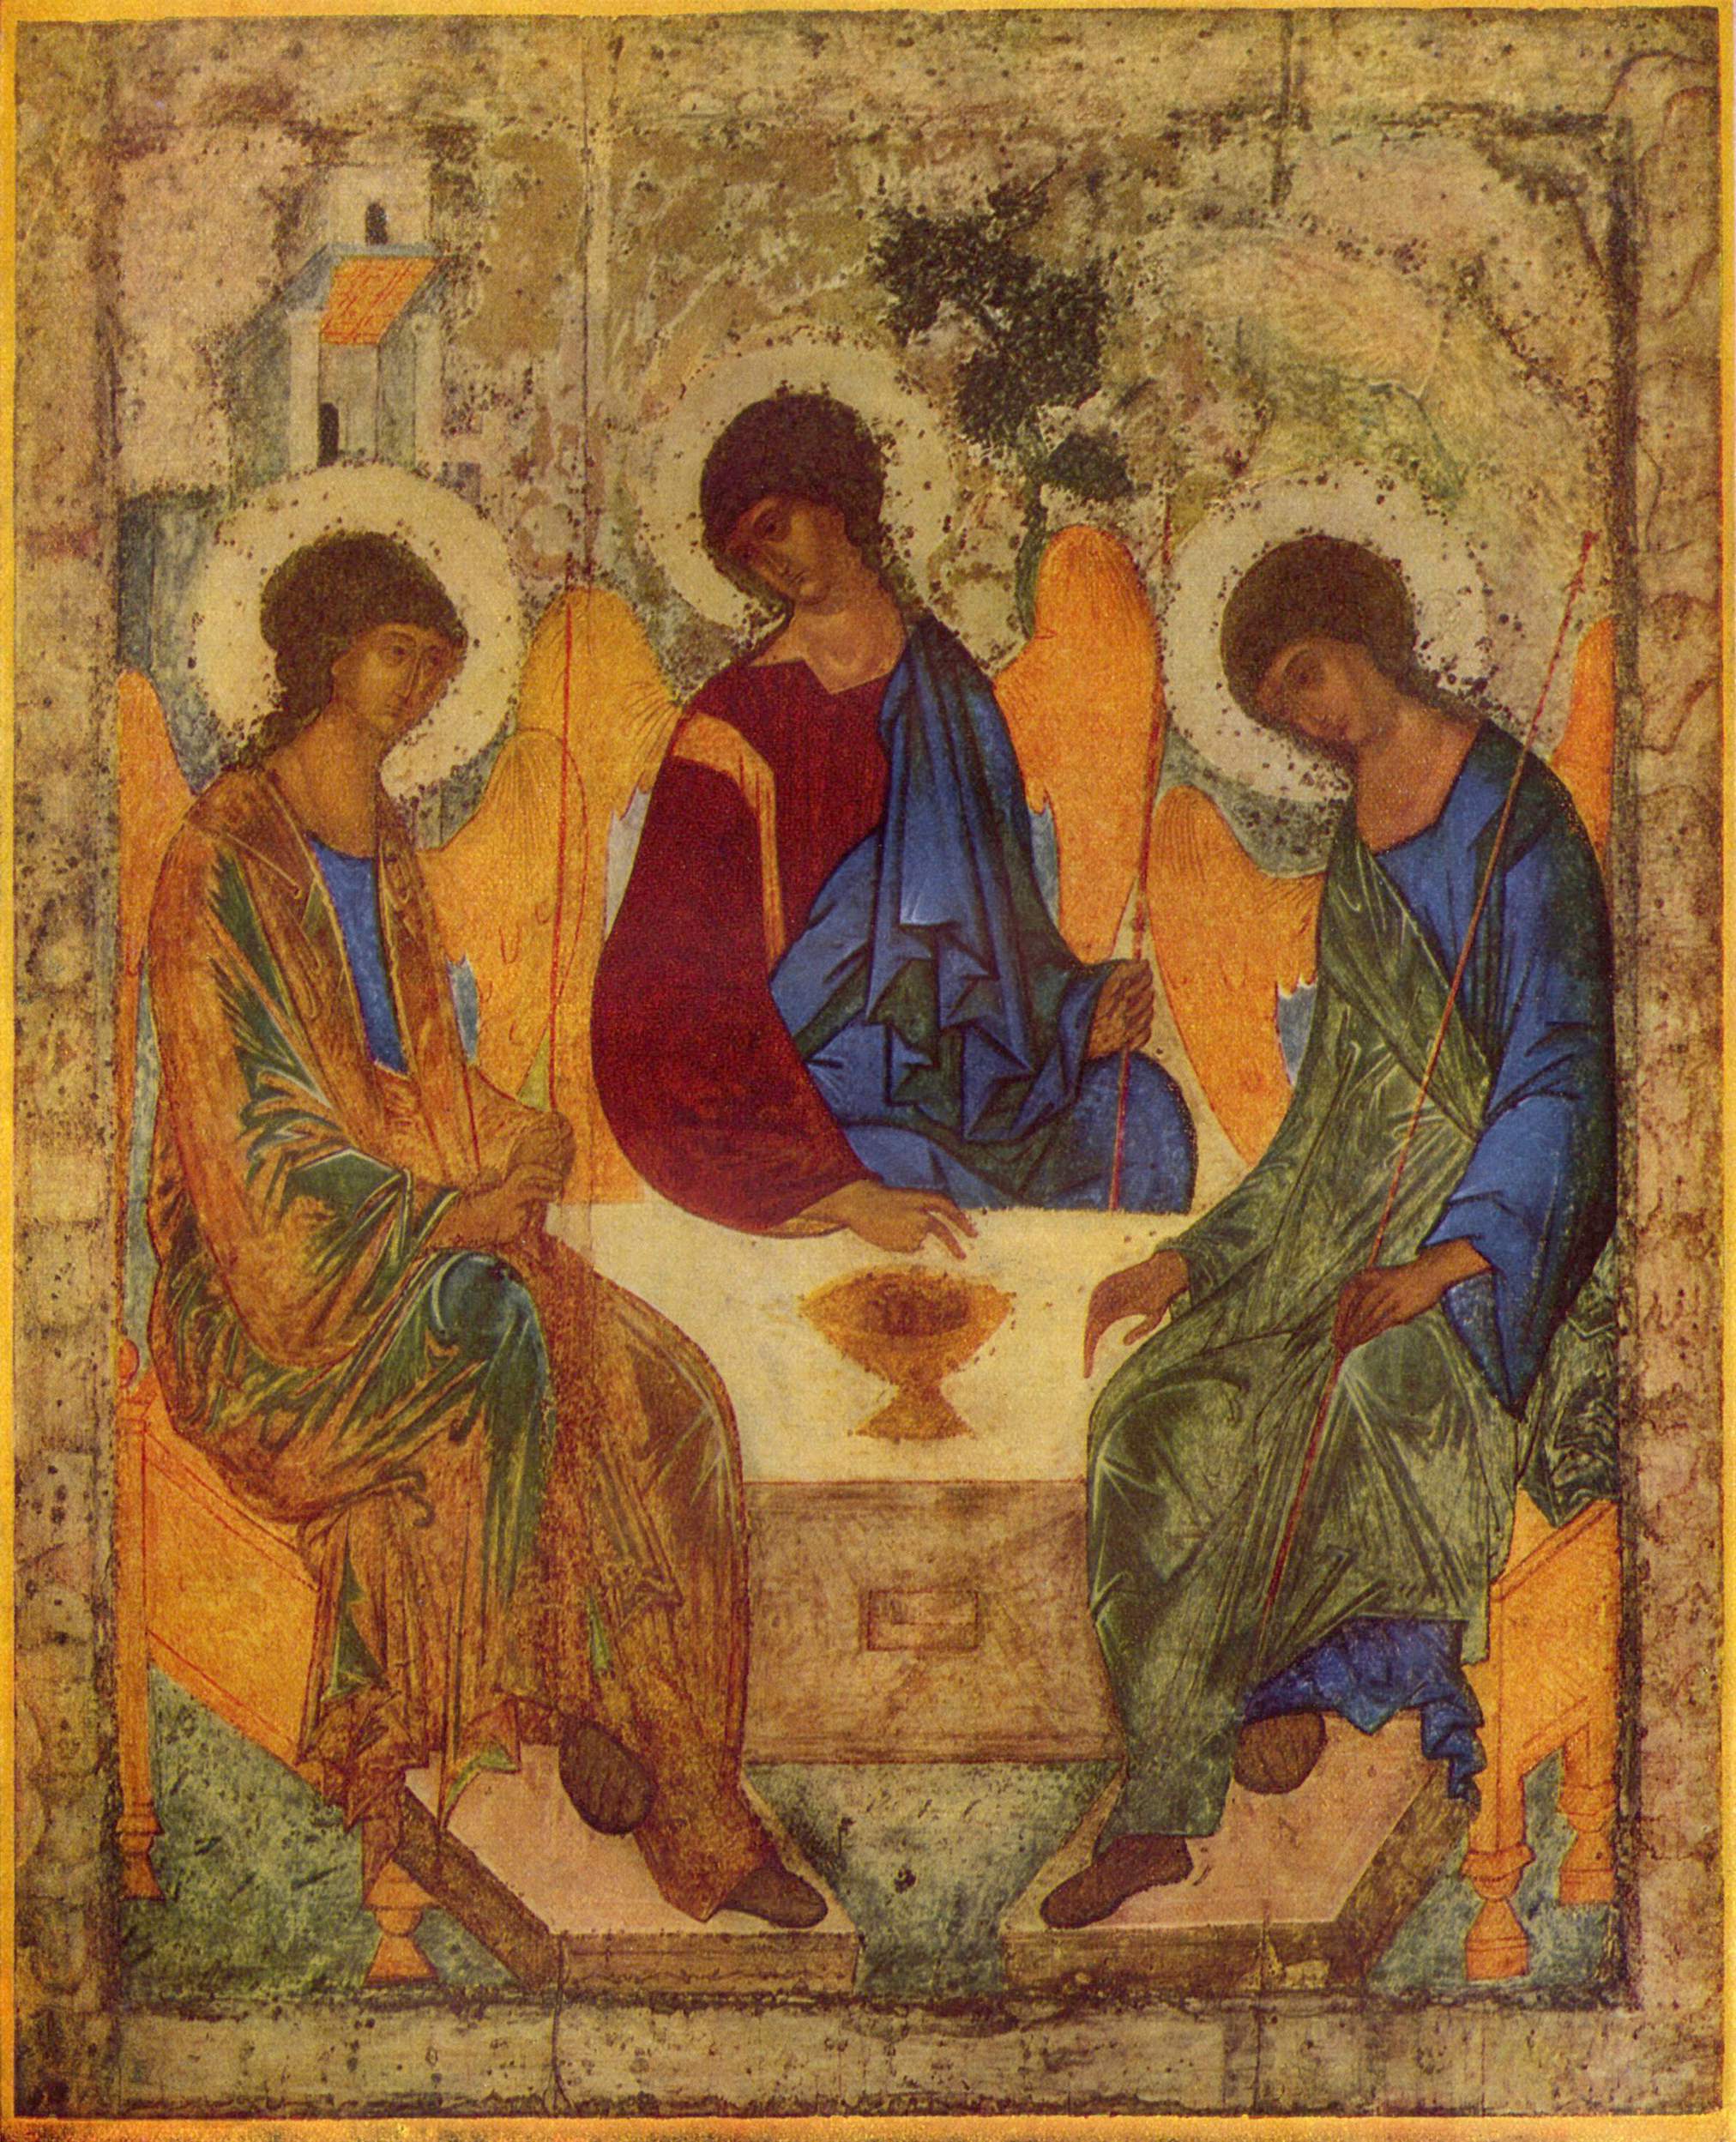 Picturing the Trinity: Rublev’s icon and the myth of East/West divisions